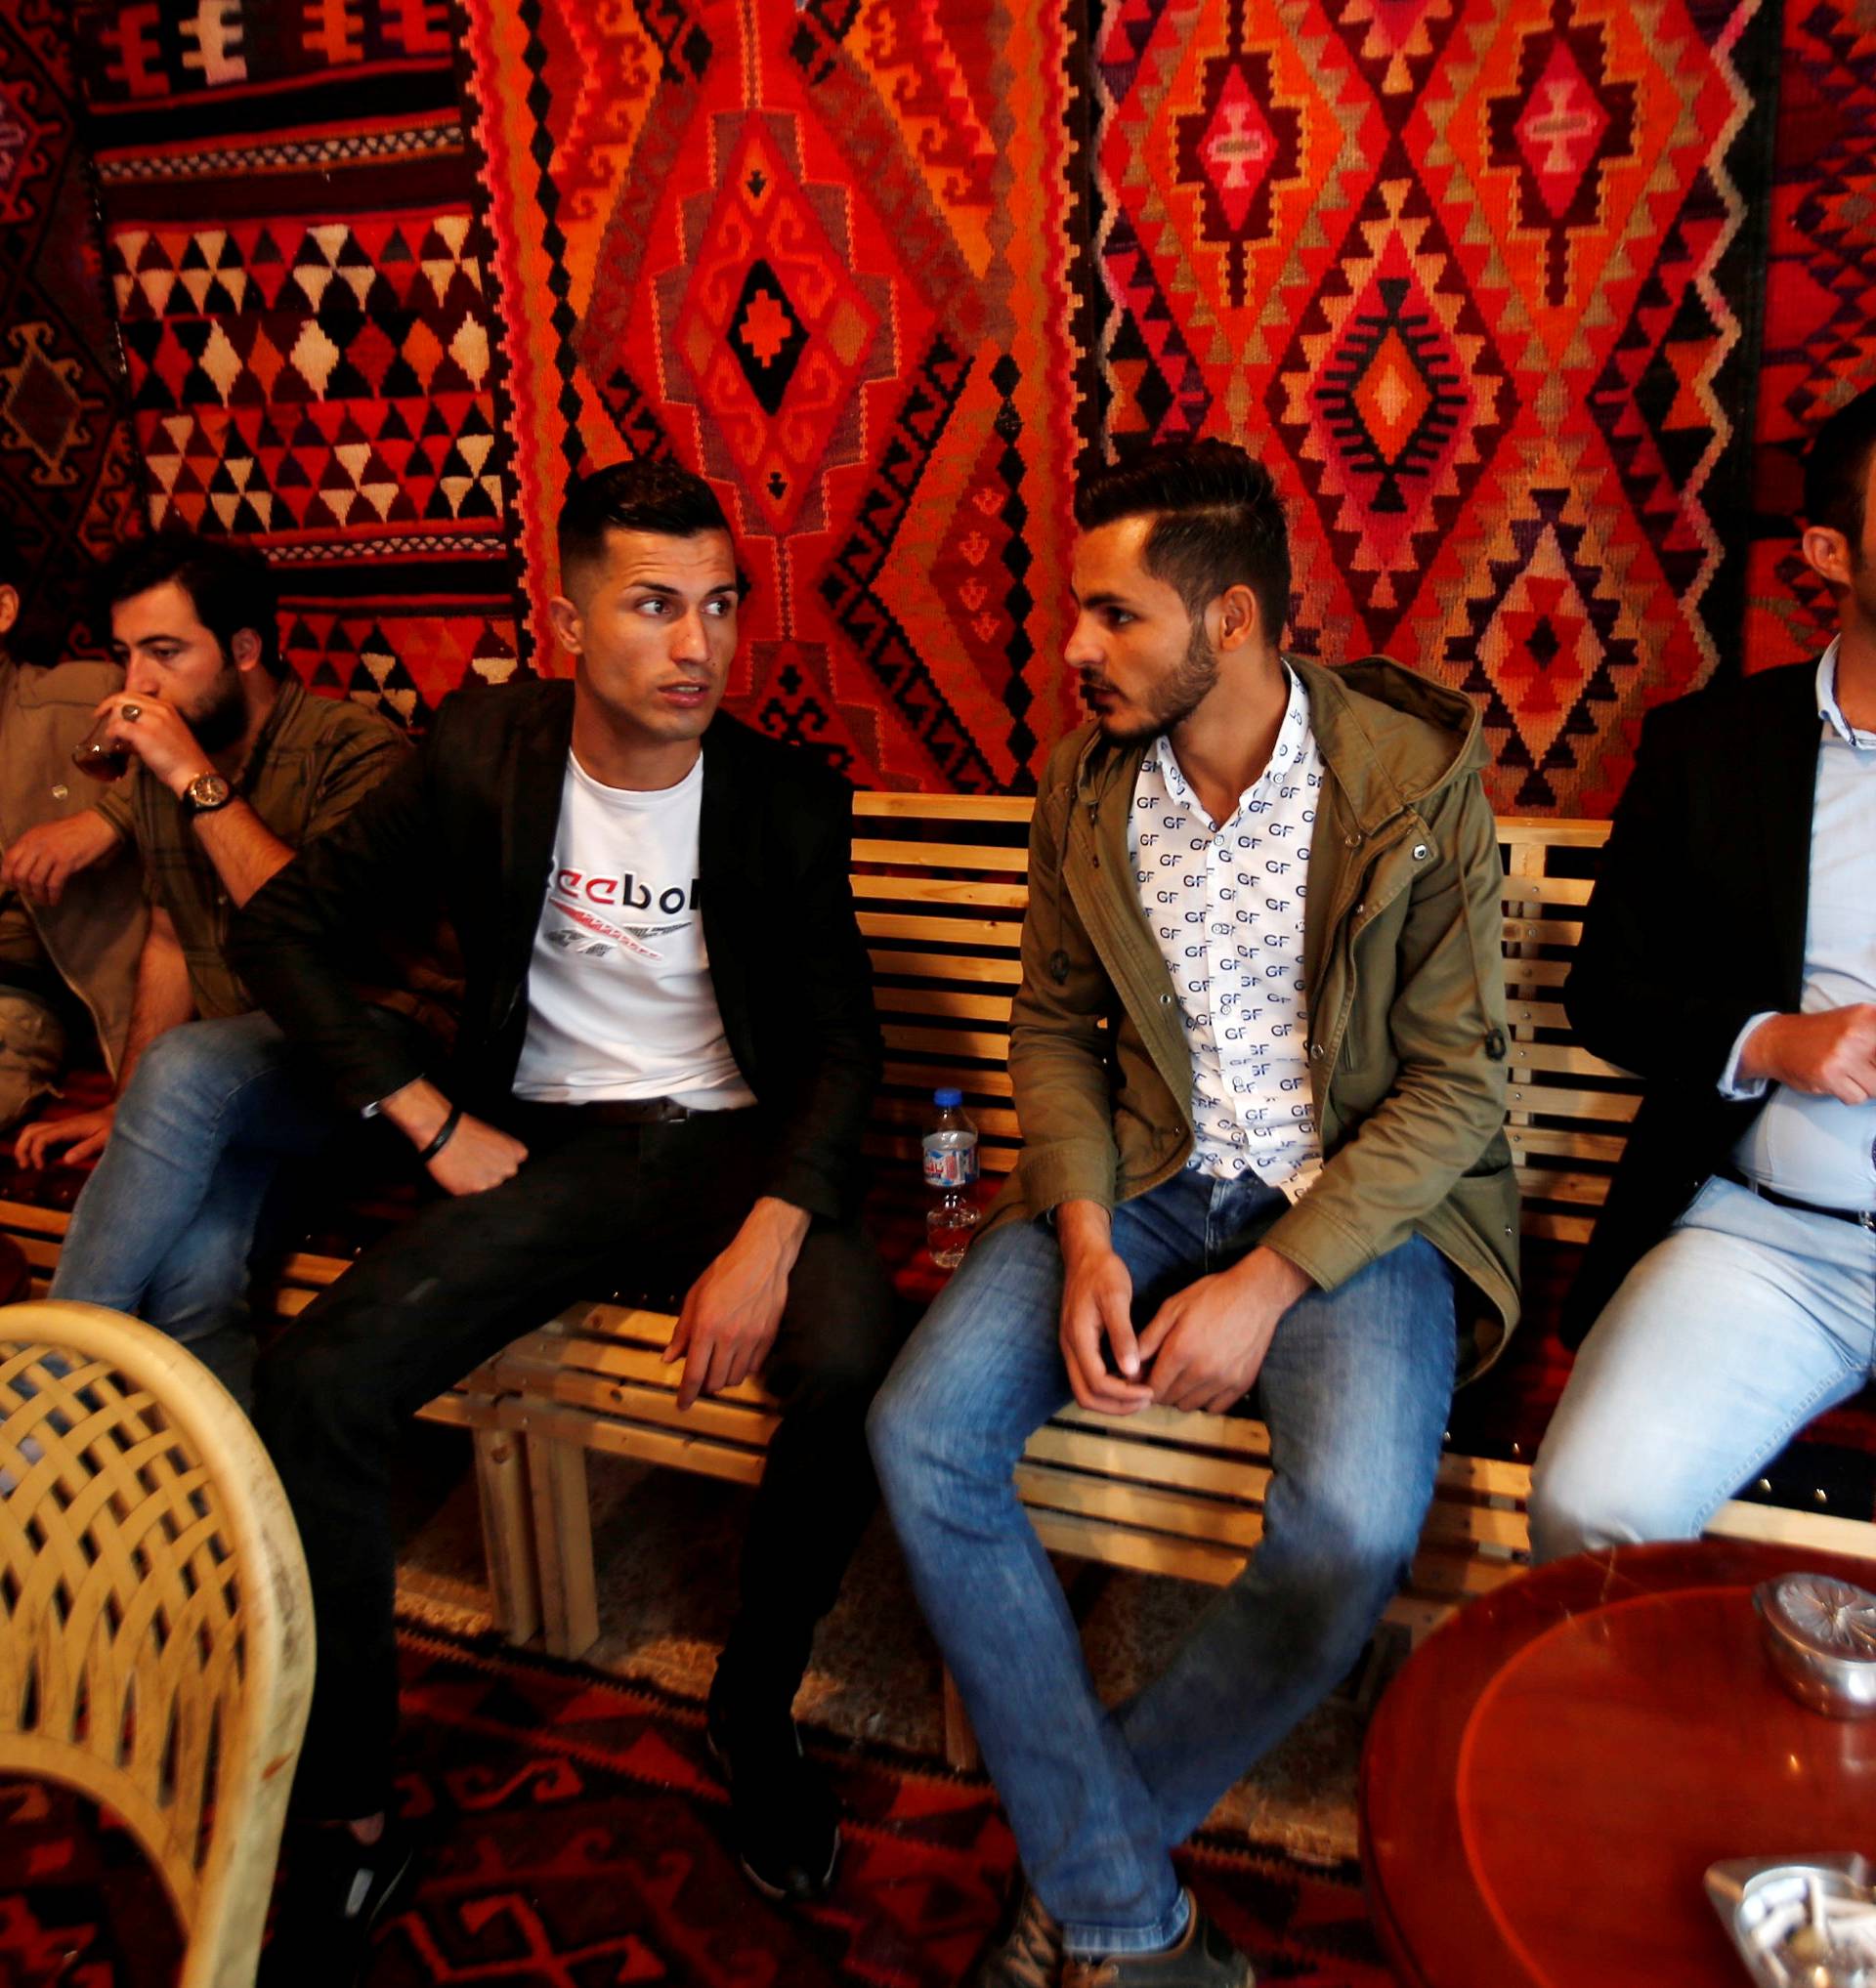 Biwar Abdullah, 25, an Iraqi Kurdish local footballer, who looks like the football player Cristiano Ronaldo, sits with his friends at a cafe in the district of Soran, northeast of Erbil